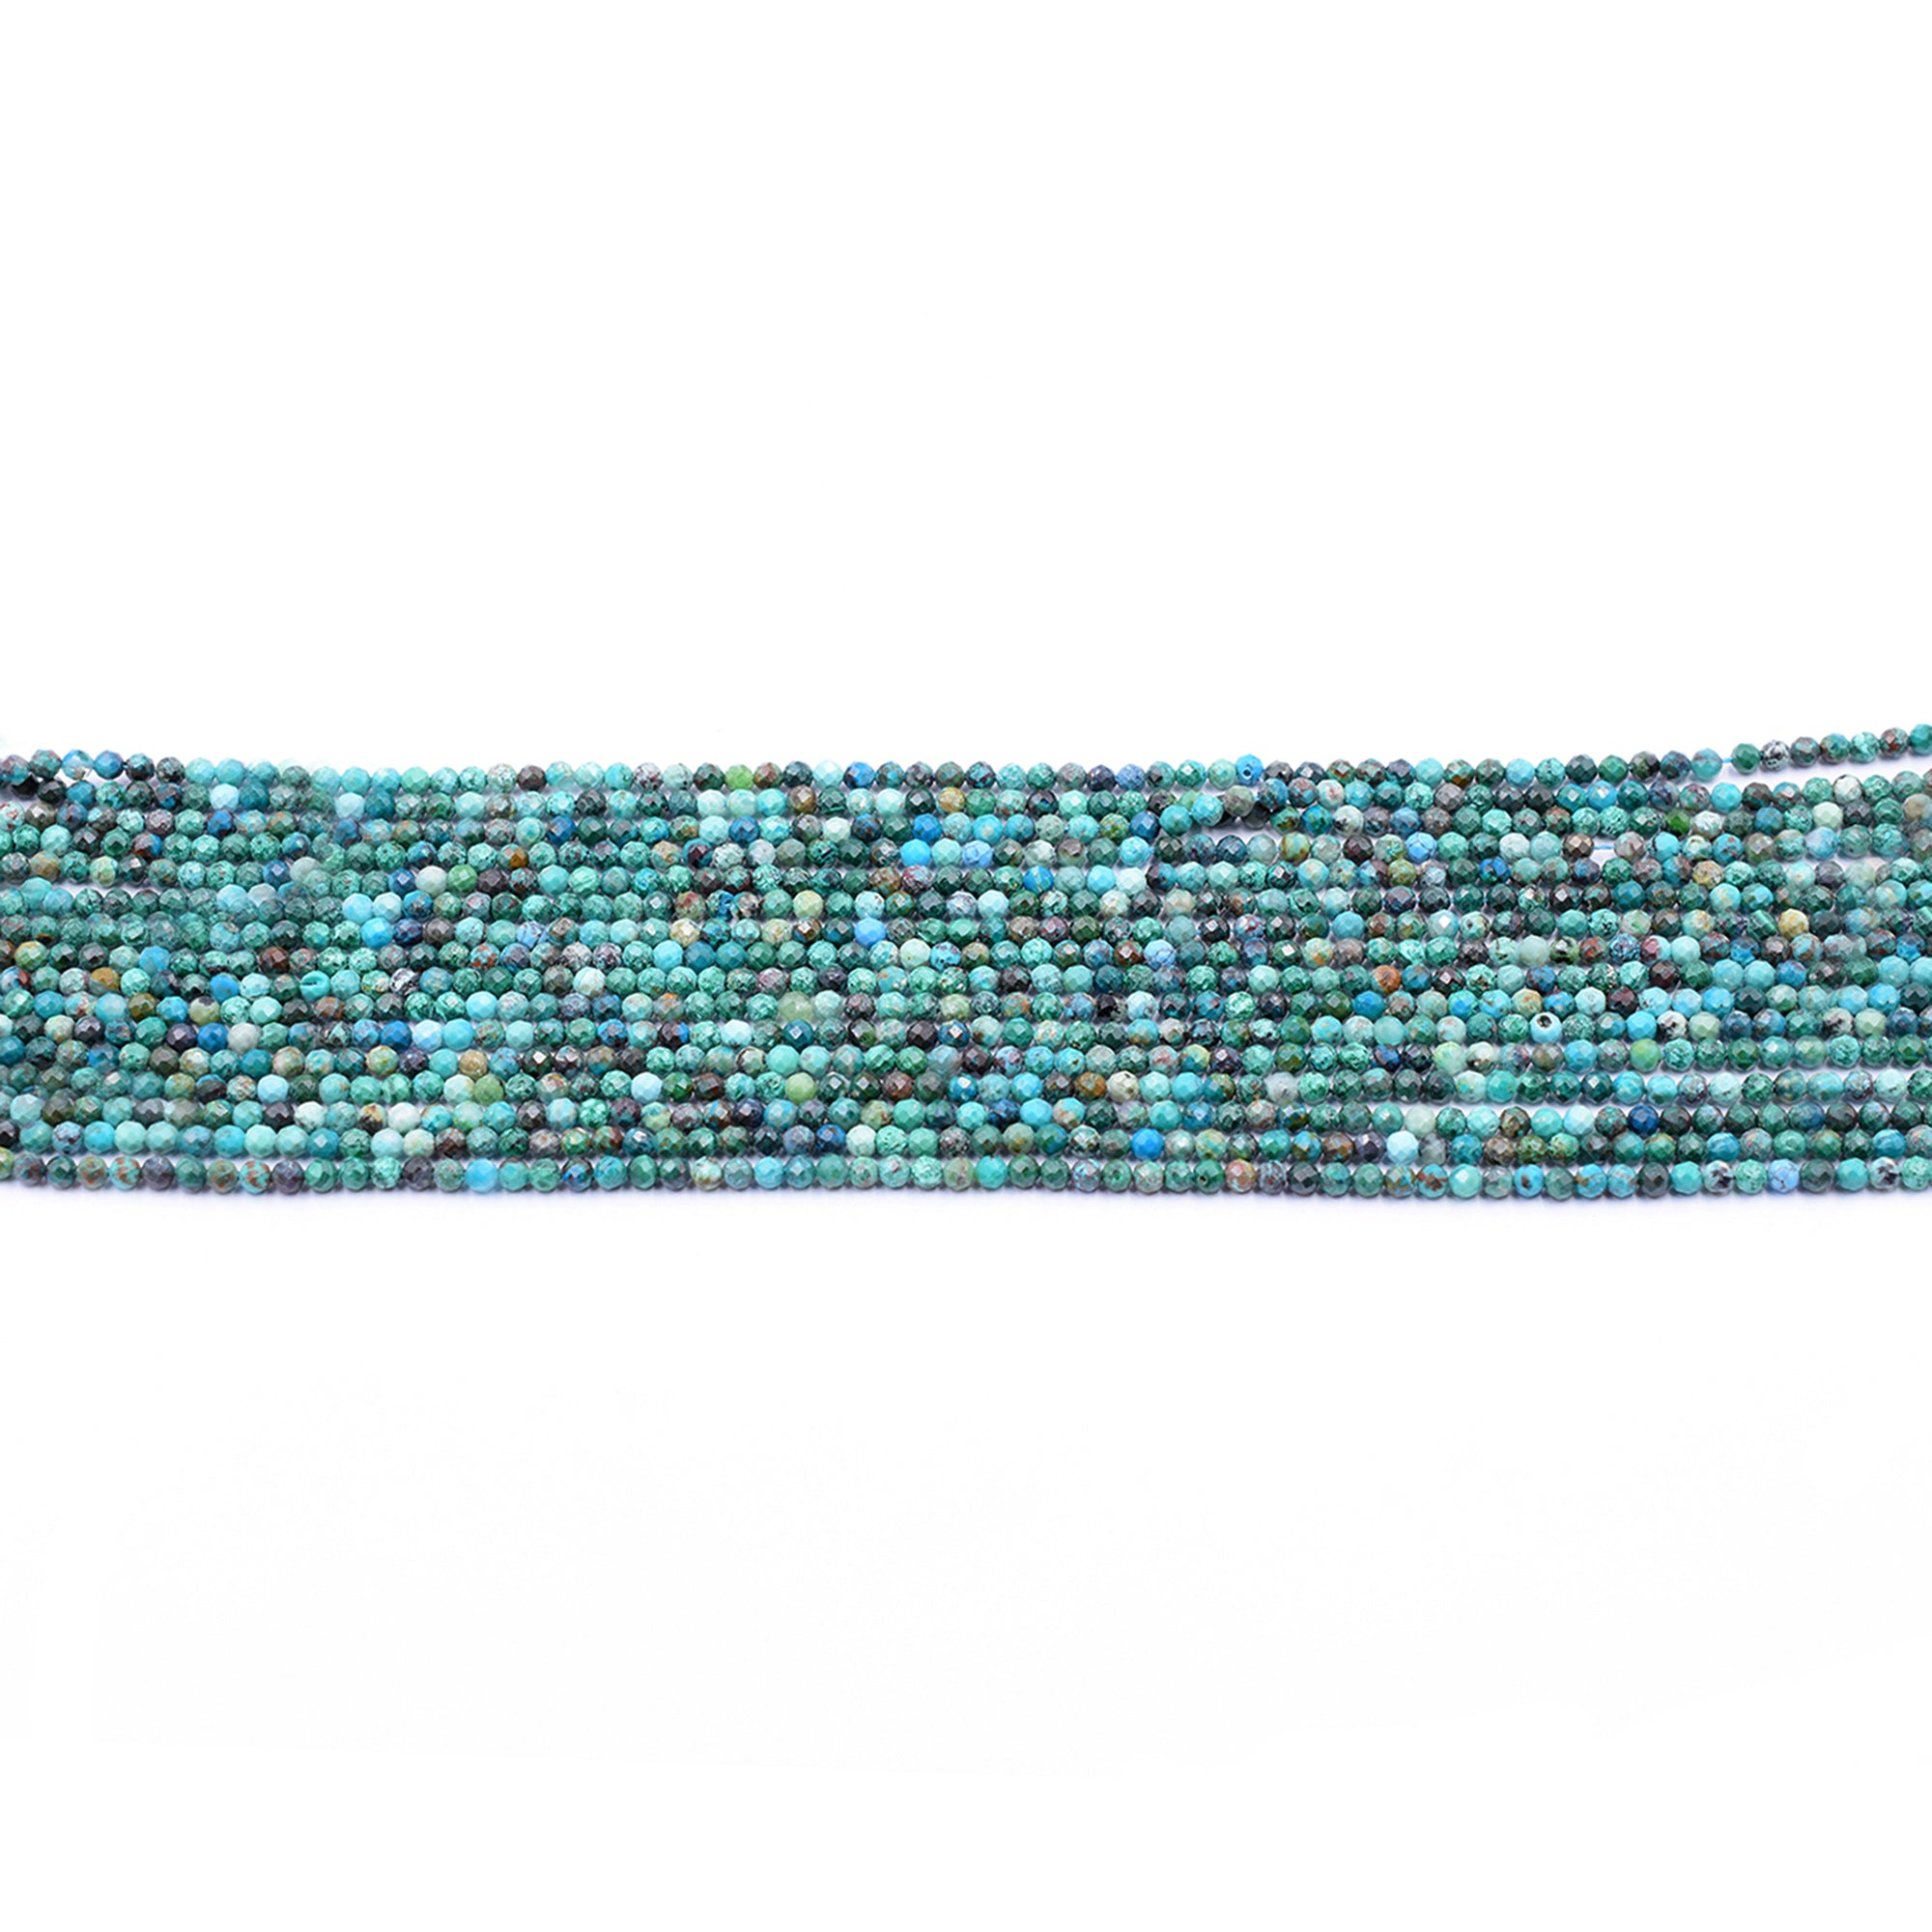 Azurite Malachite 3 MM Faceted Rondelle Shape Beads Strand